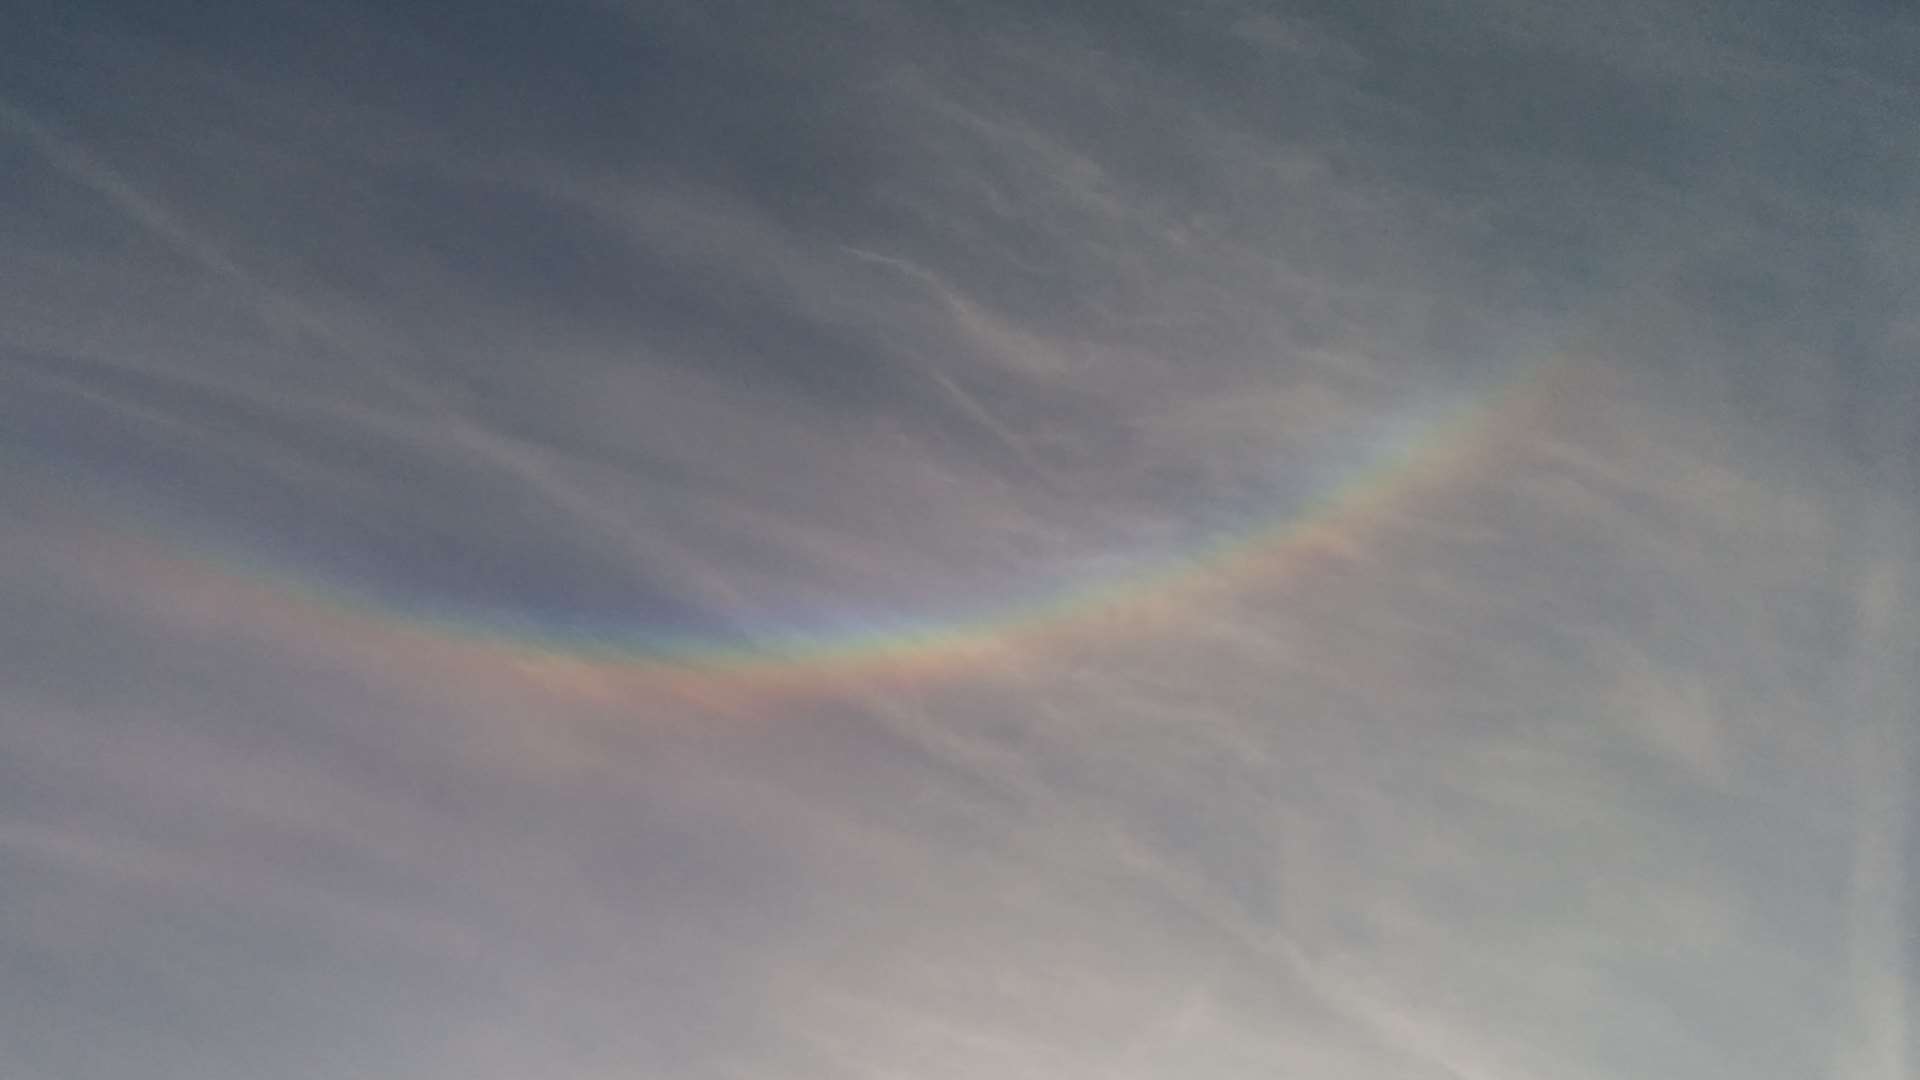 The rare weather phenomenon was also captured by Josh Lyons in South Ashford